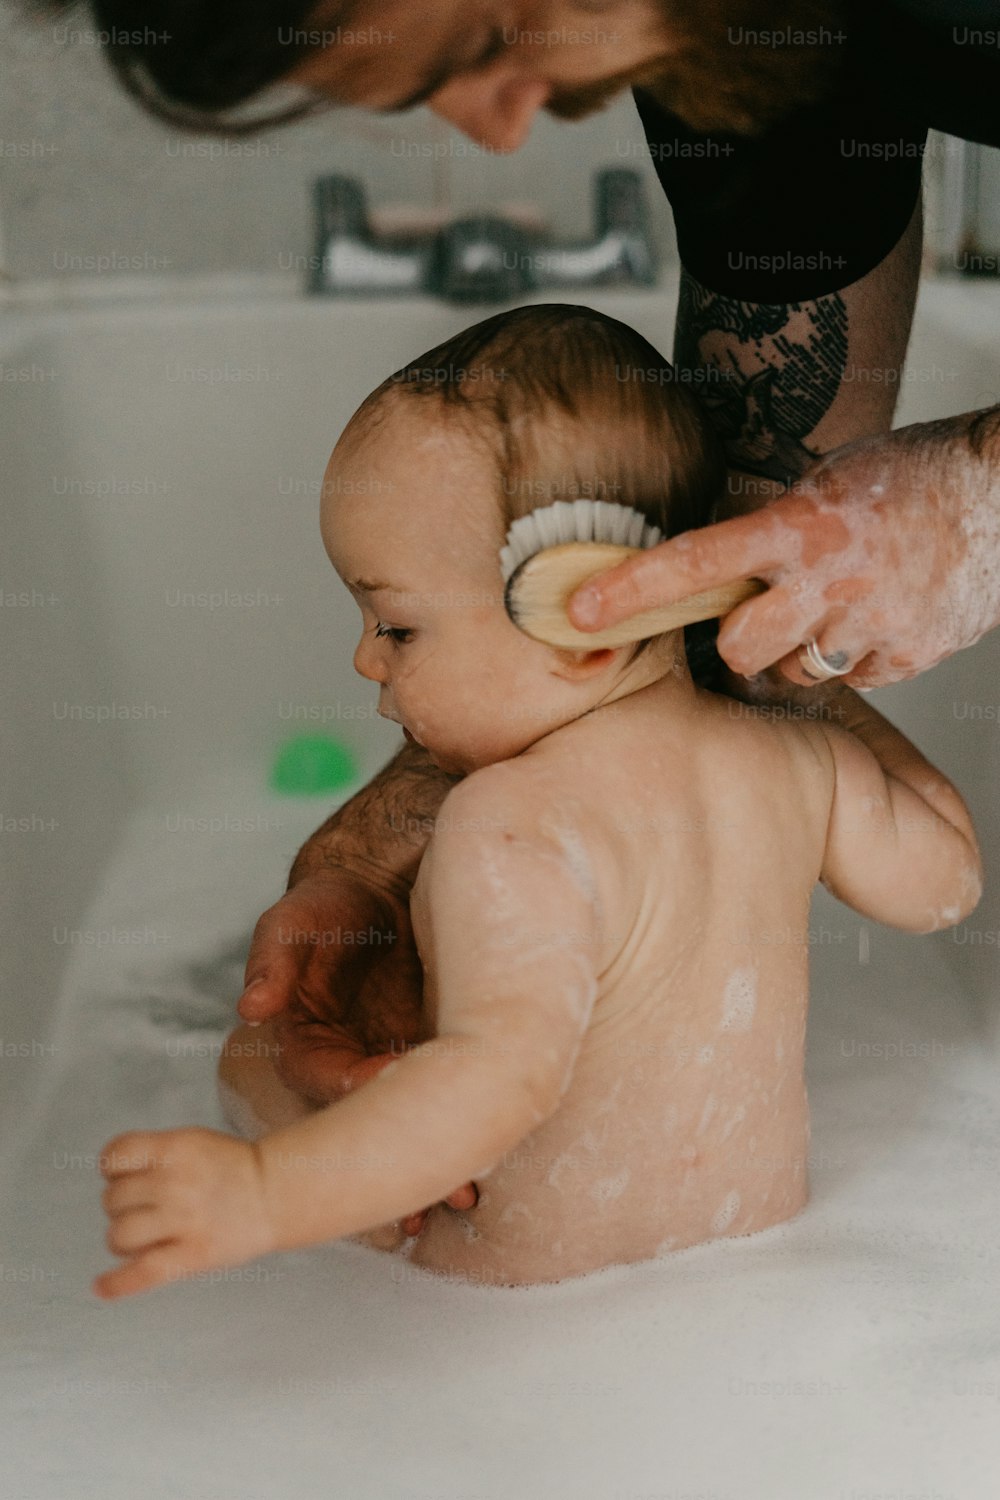 a baby sitting in a bathtub being washed with a brush